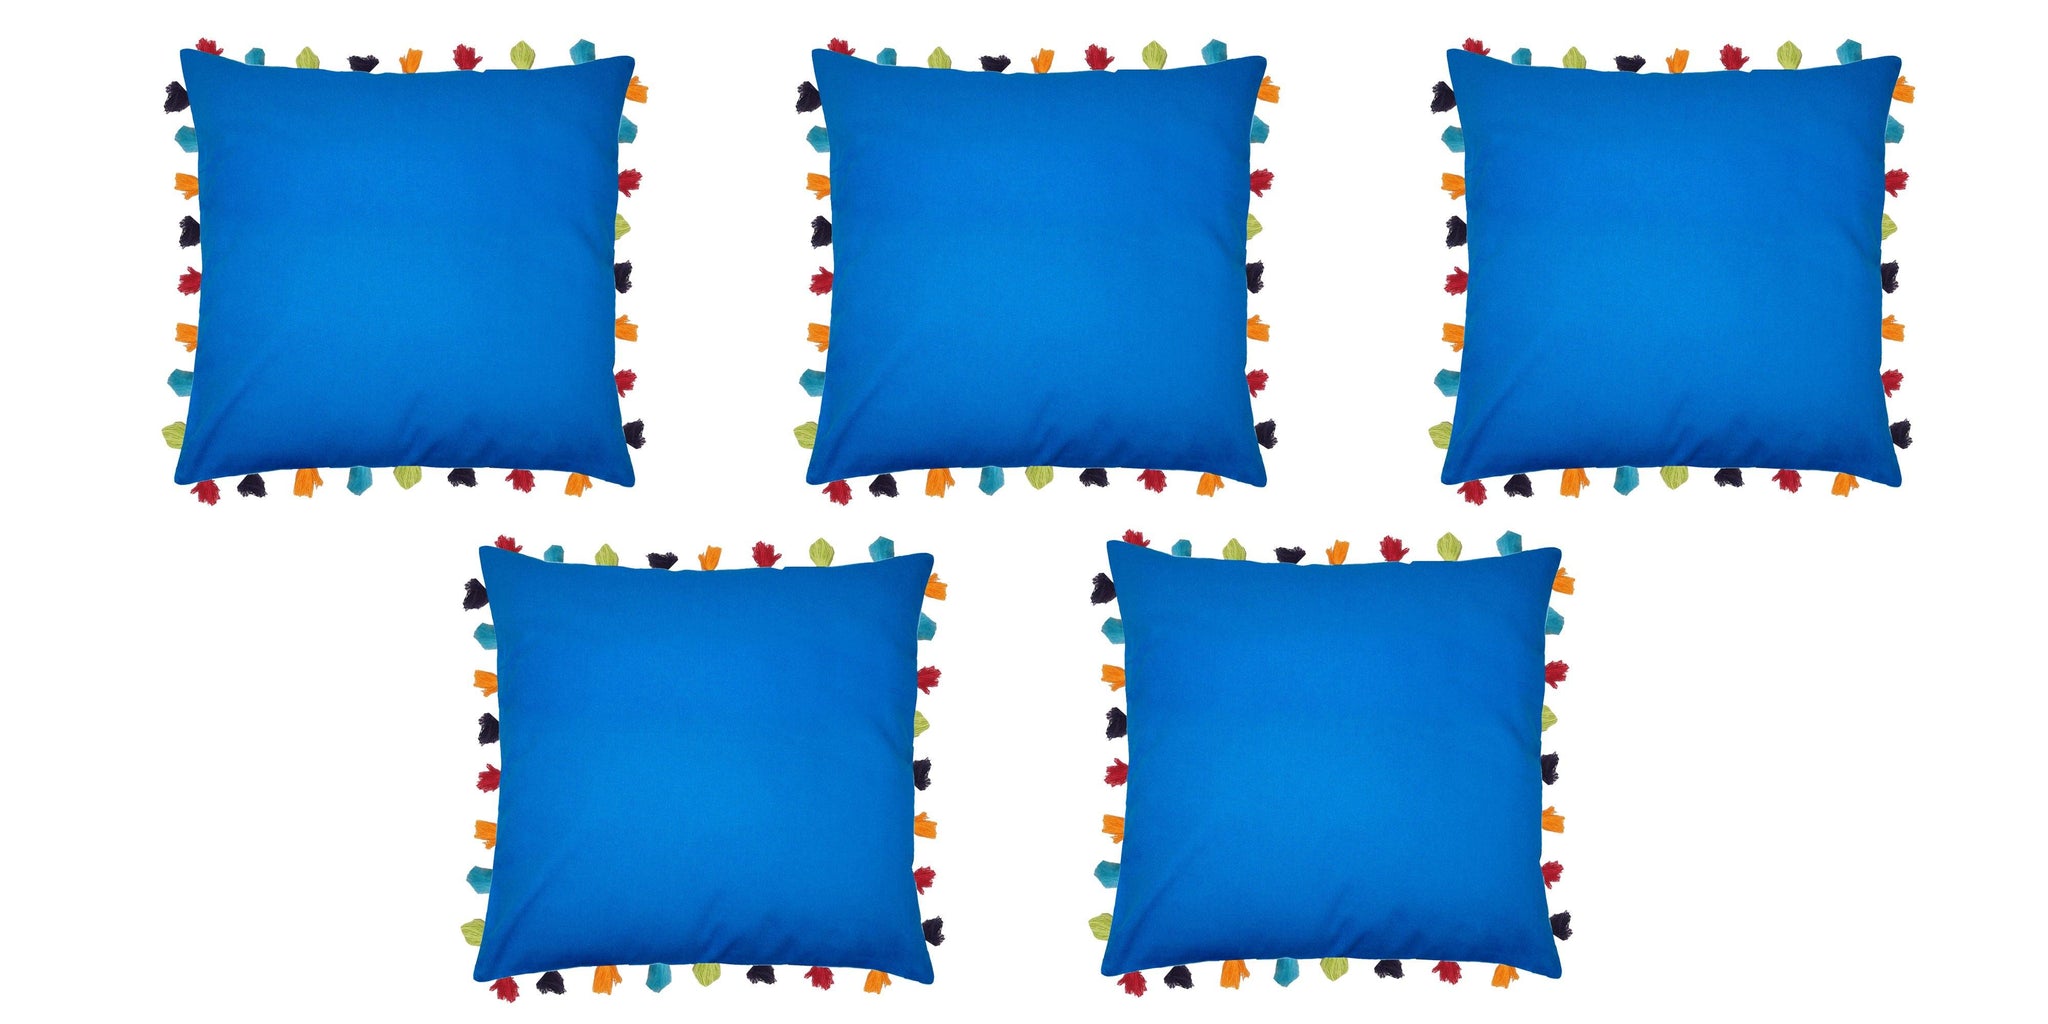 Lushomes Sky Diver Cushion Cover with Colorful tassels (5 pcs, 24 x 24”) - Lushomes